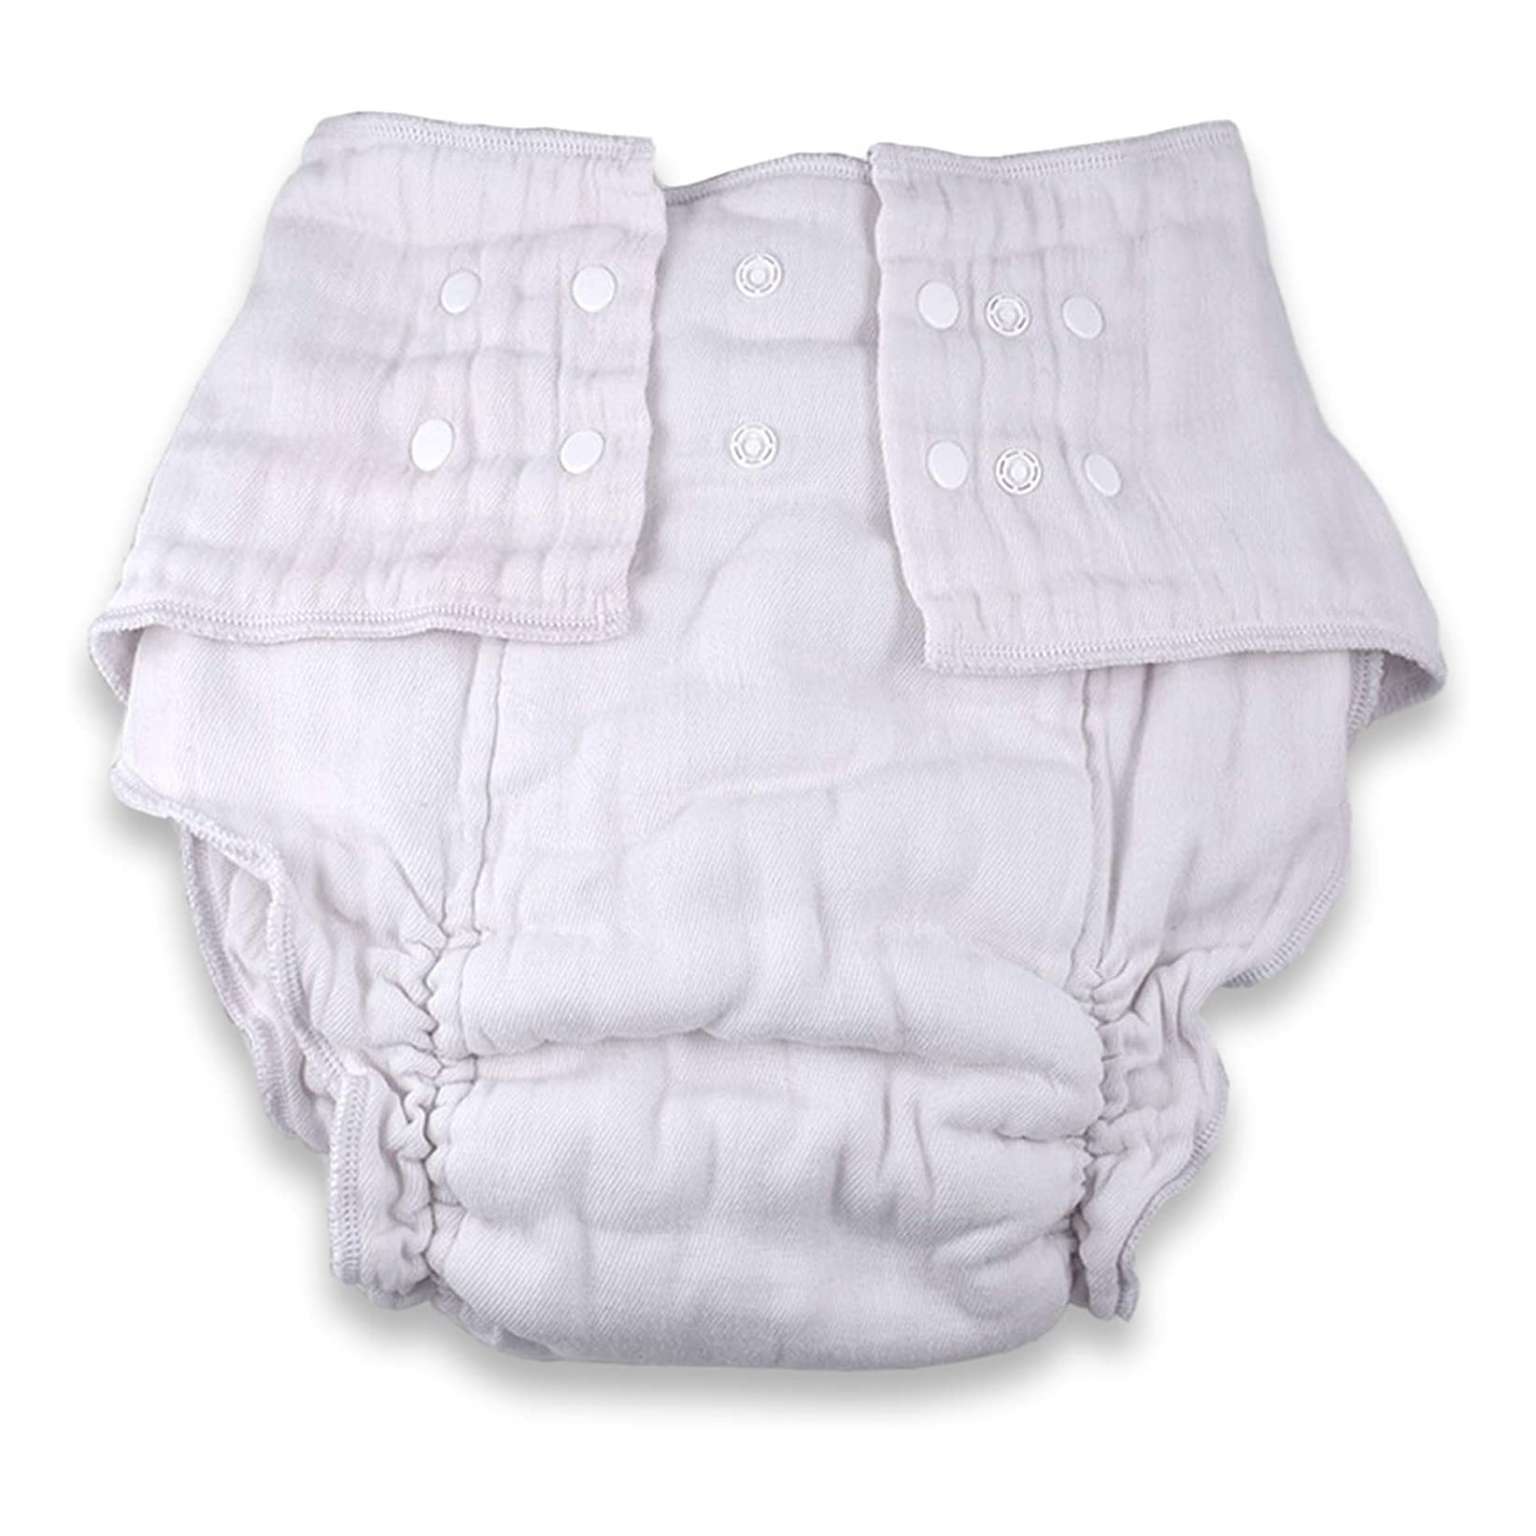 top-10-best-adult-cloth-diapers-in-2021-reviews-buyer-s-guide